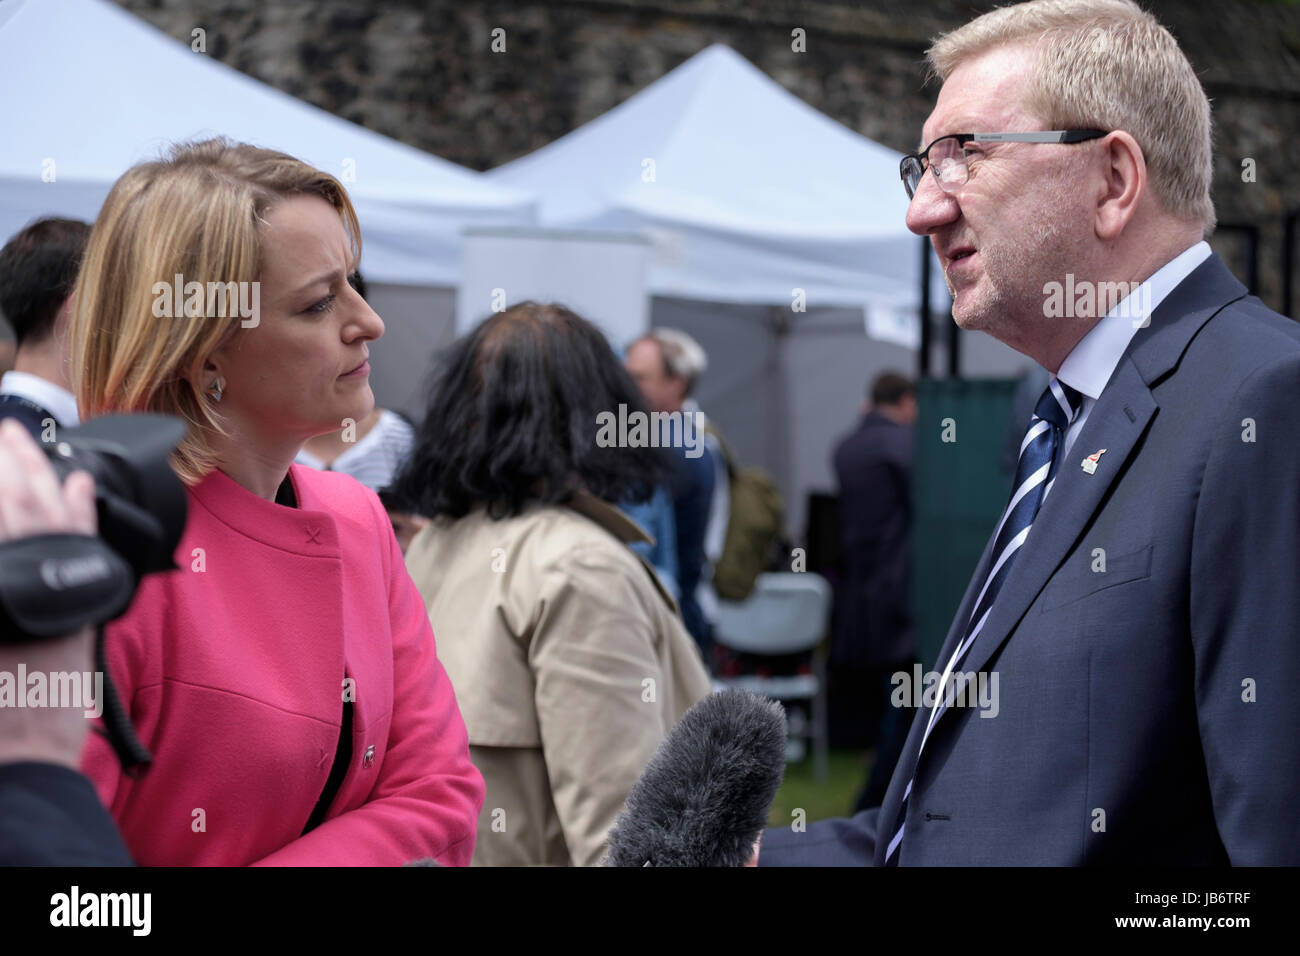 London, UK. 9th June, 2017. Len McCluskey, General Secretary of the Unite union is interviewed by the BBC's Political Editor, Laura Kuenssberg following UK General Election. Credit: mark phillips/Alamy Live News Stock Photo